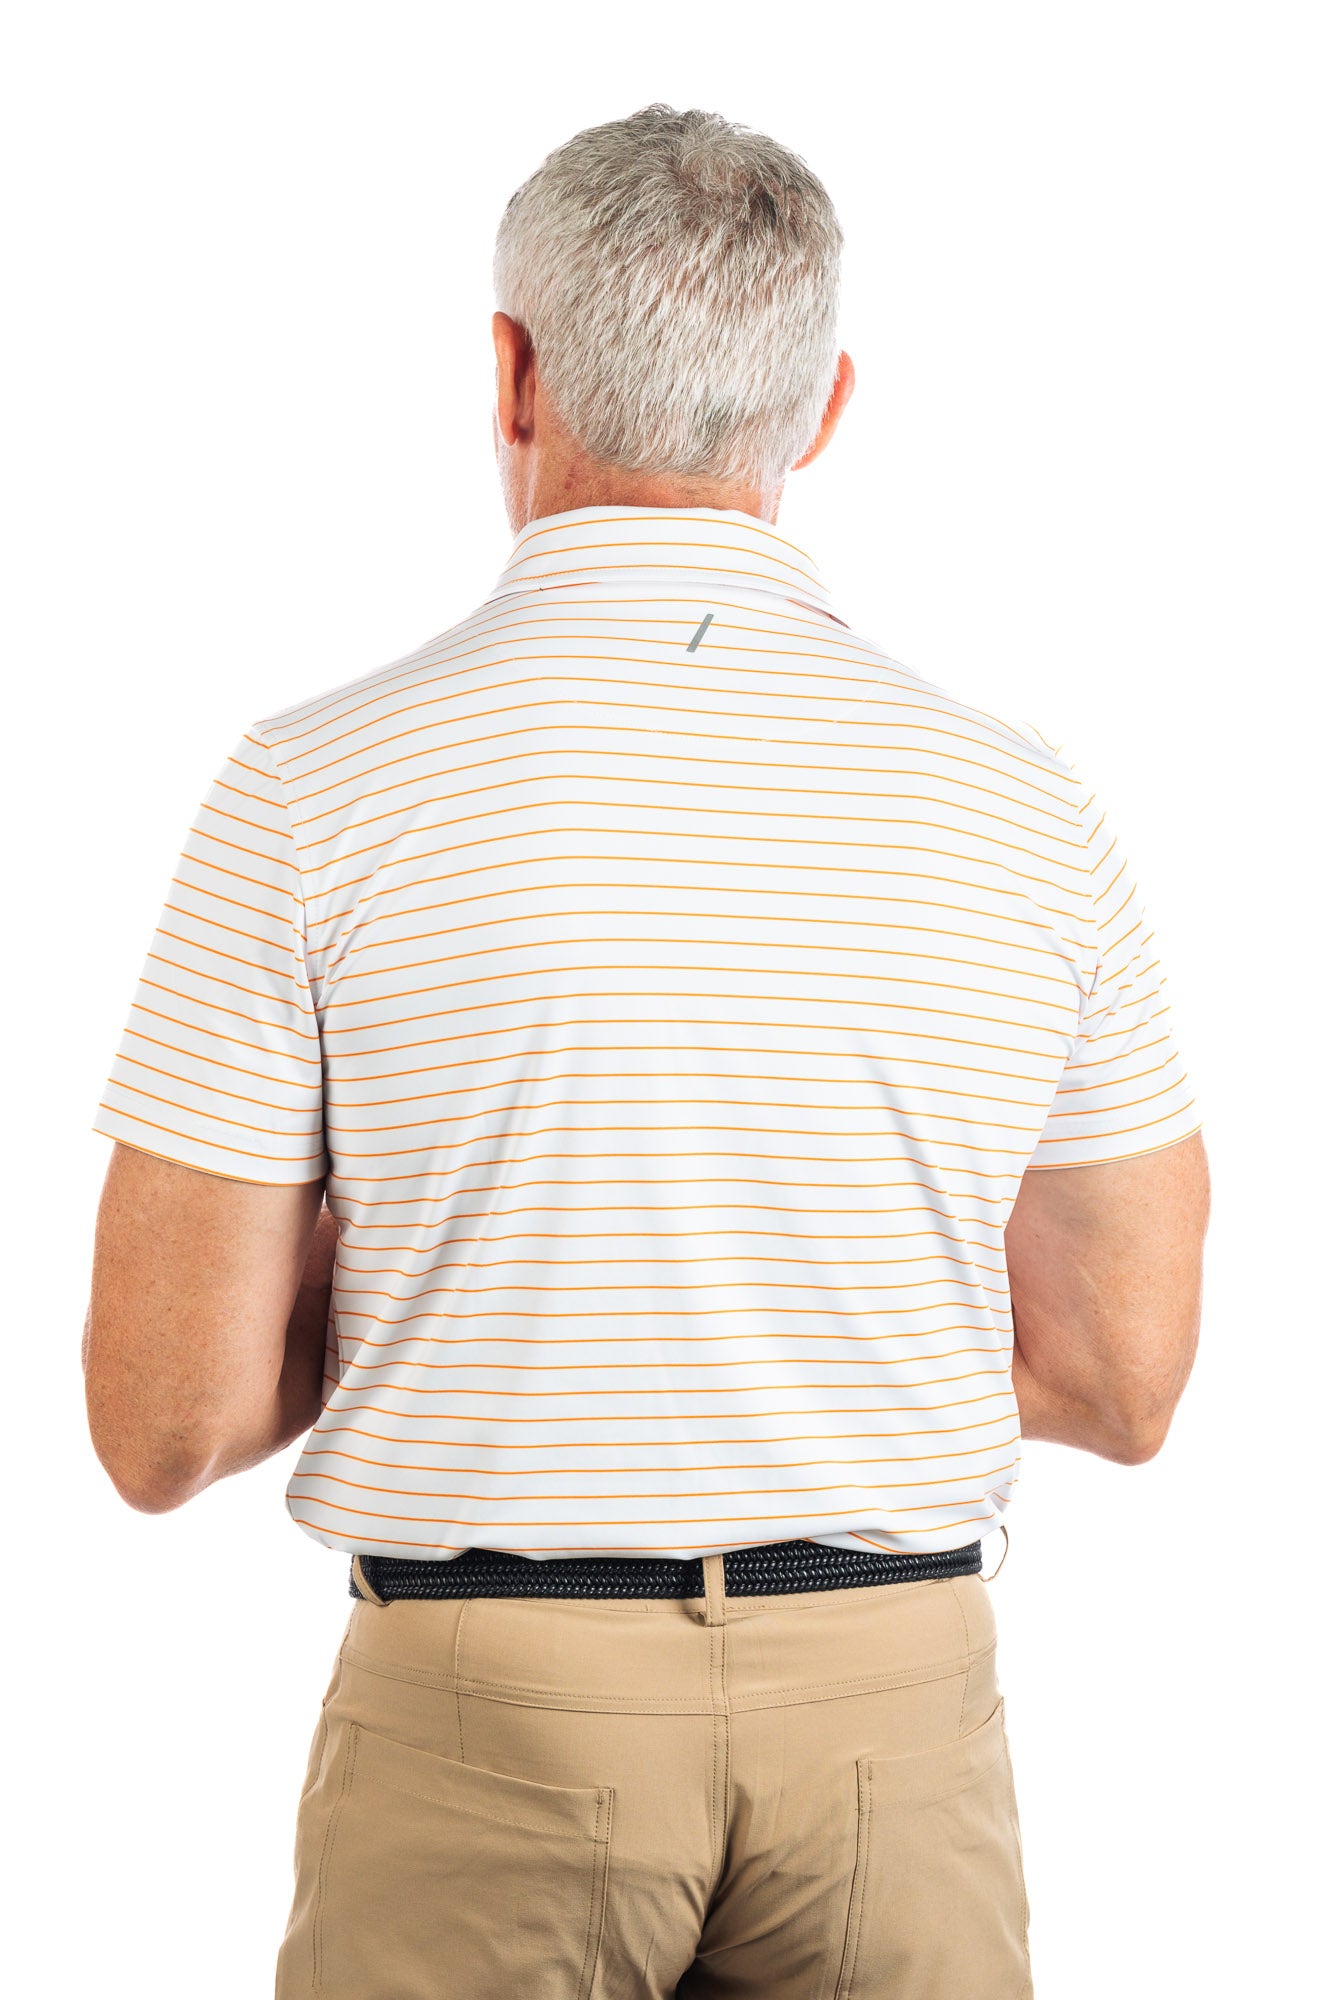 Waist up photo of model wearing the Orange striped golf polo on a white background showing us his back. 